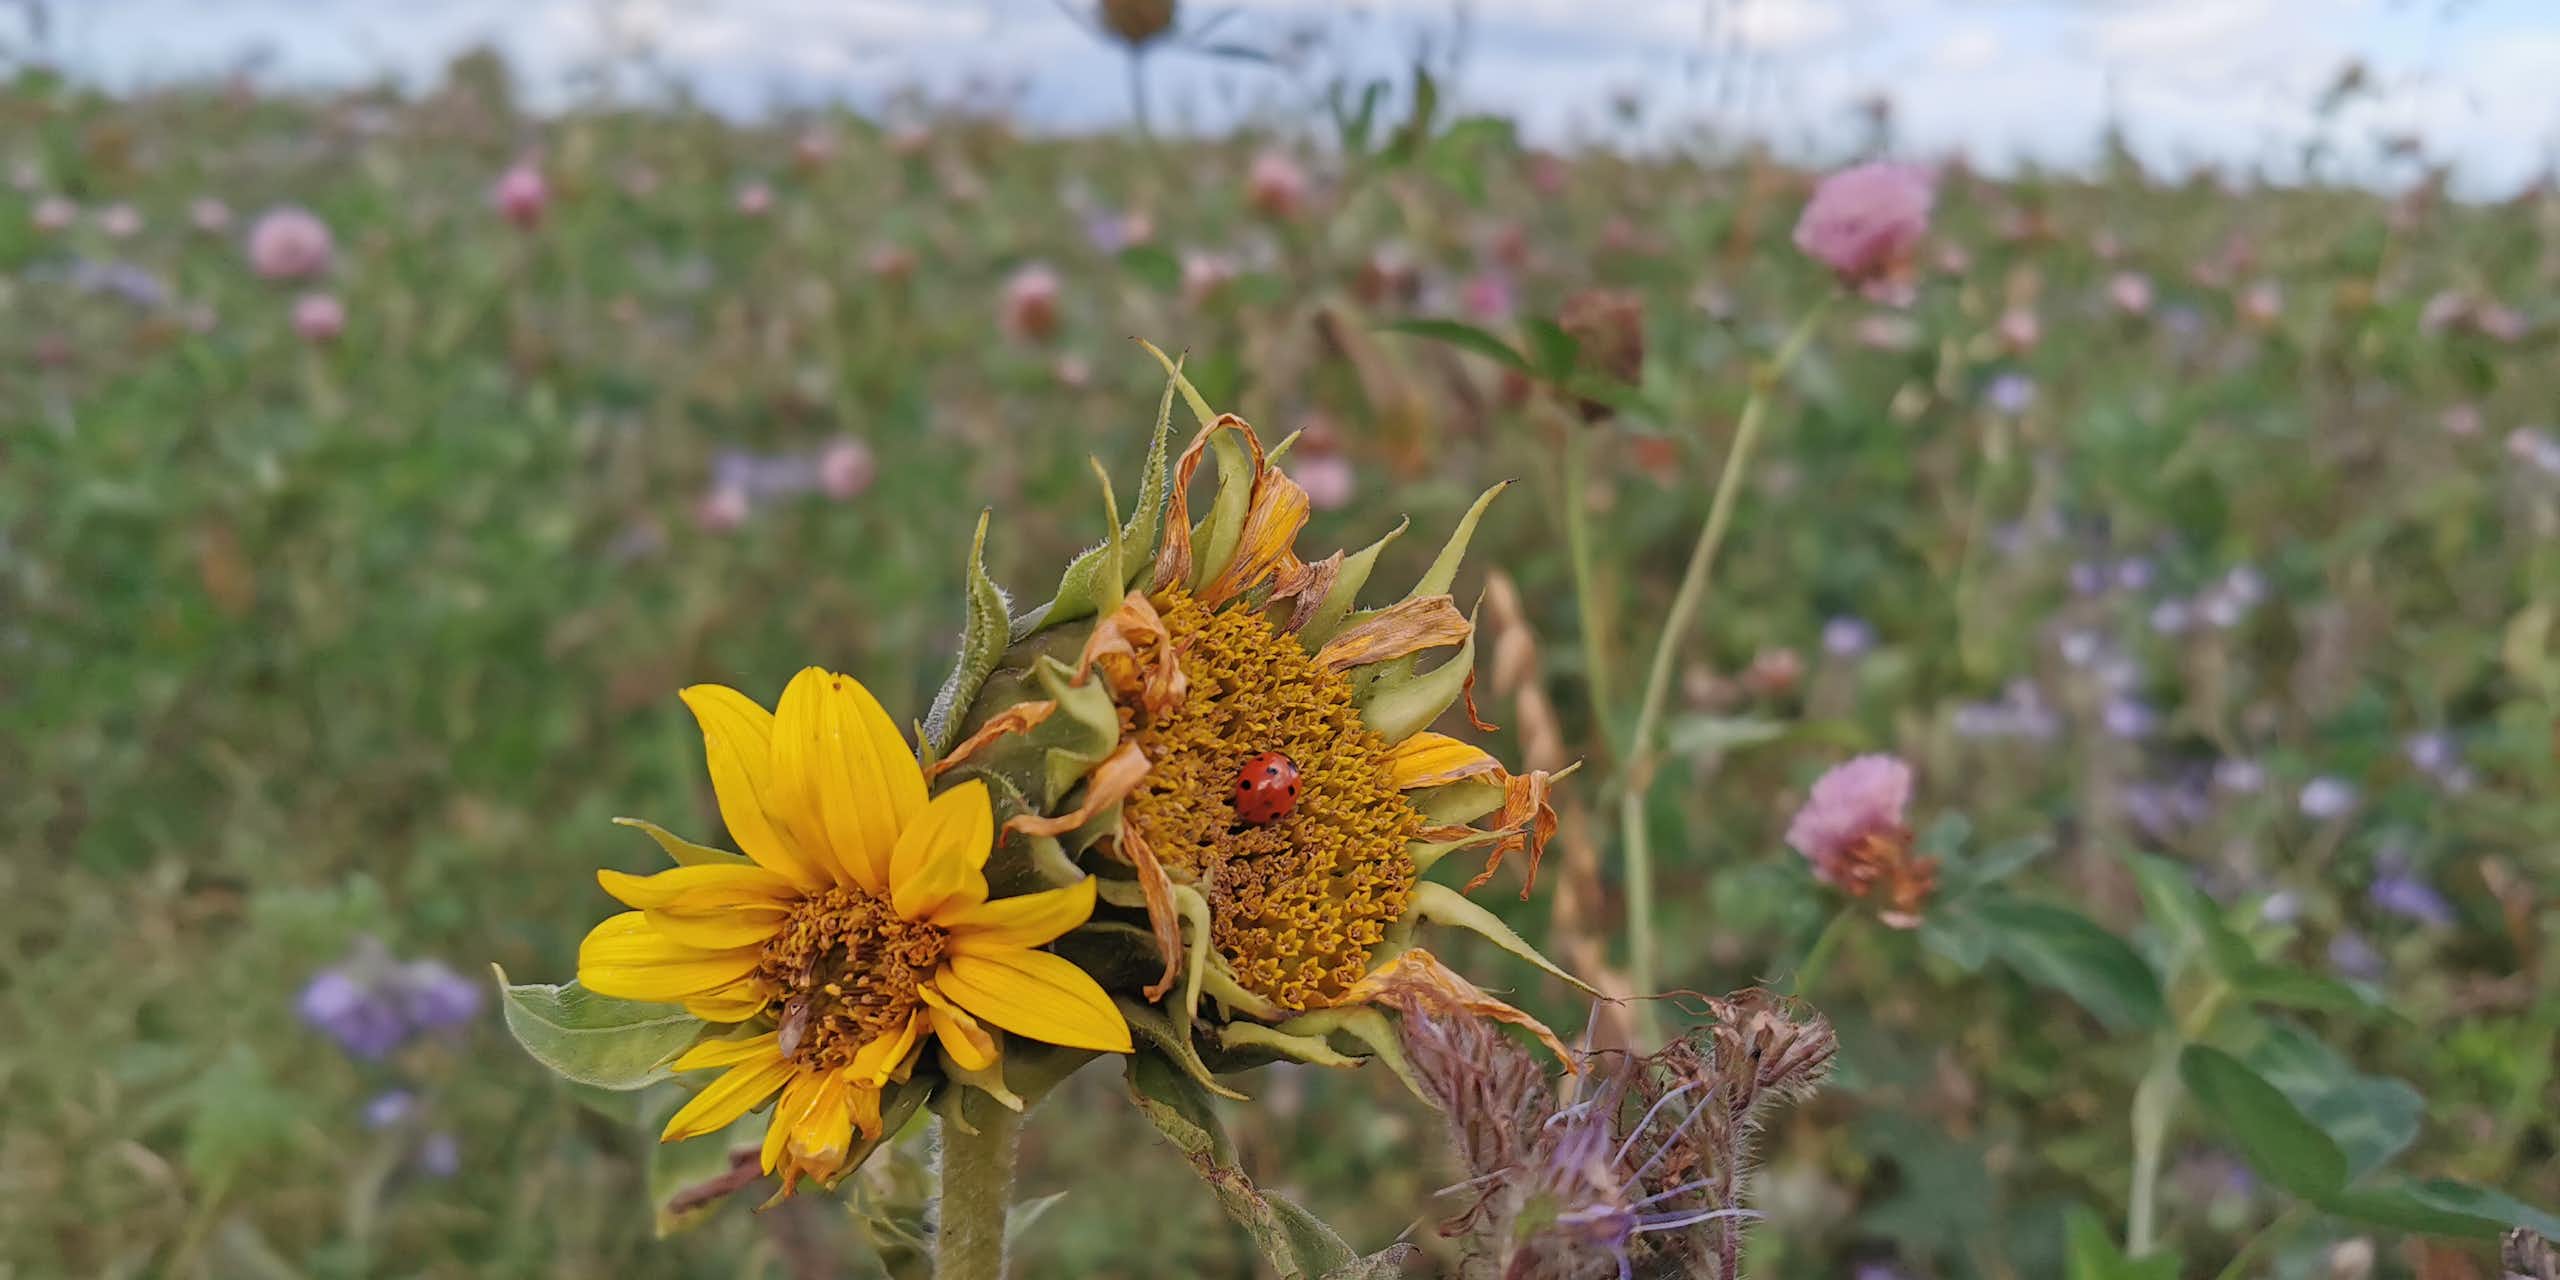 field of wildflowers, heads of two yellow sunflowers in foreground with red bug